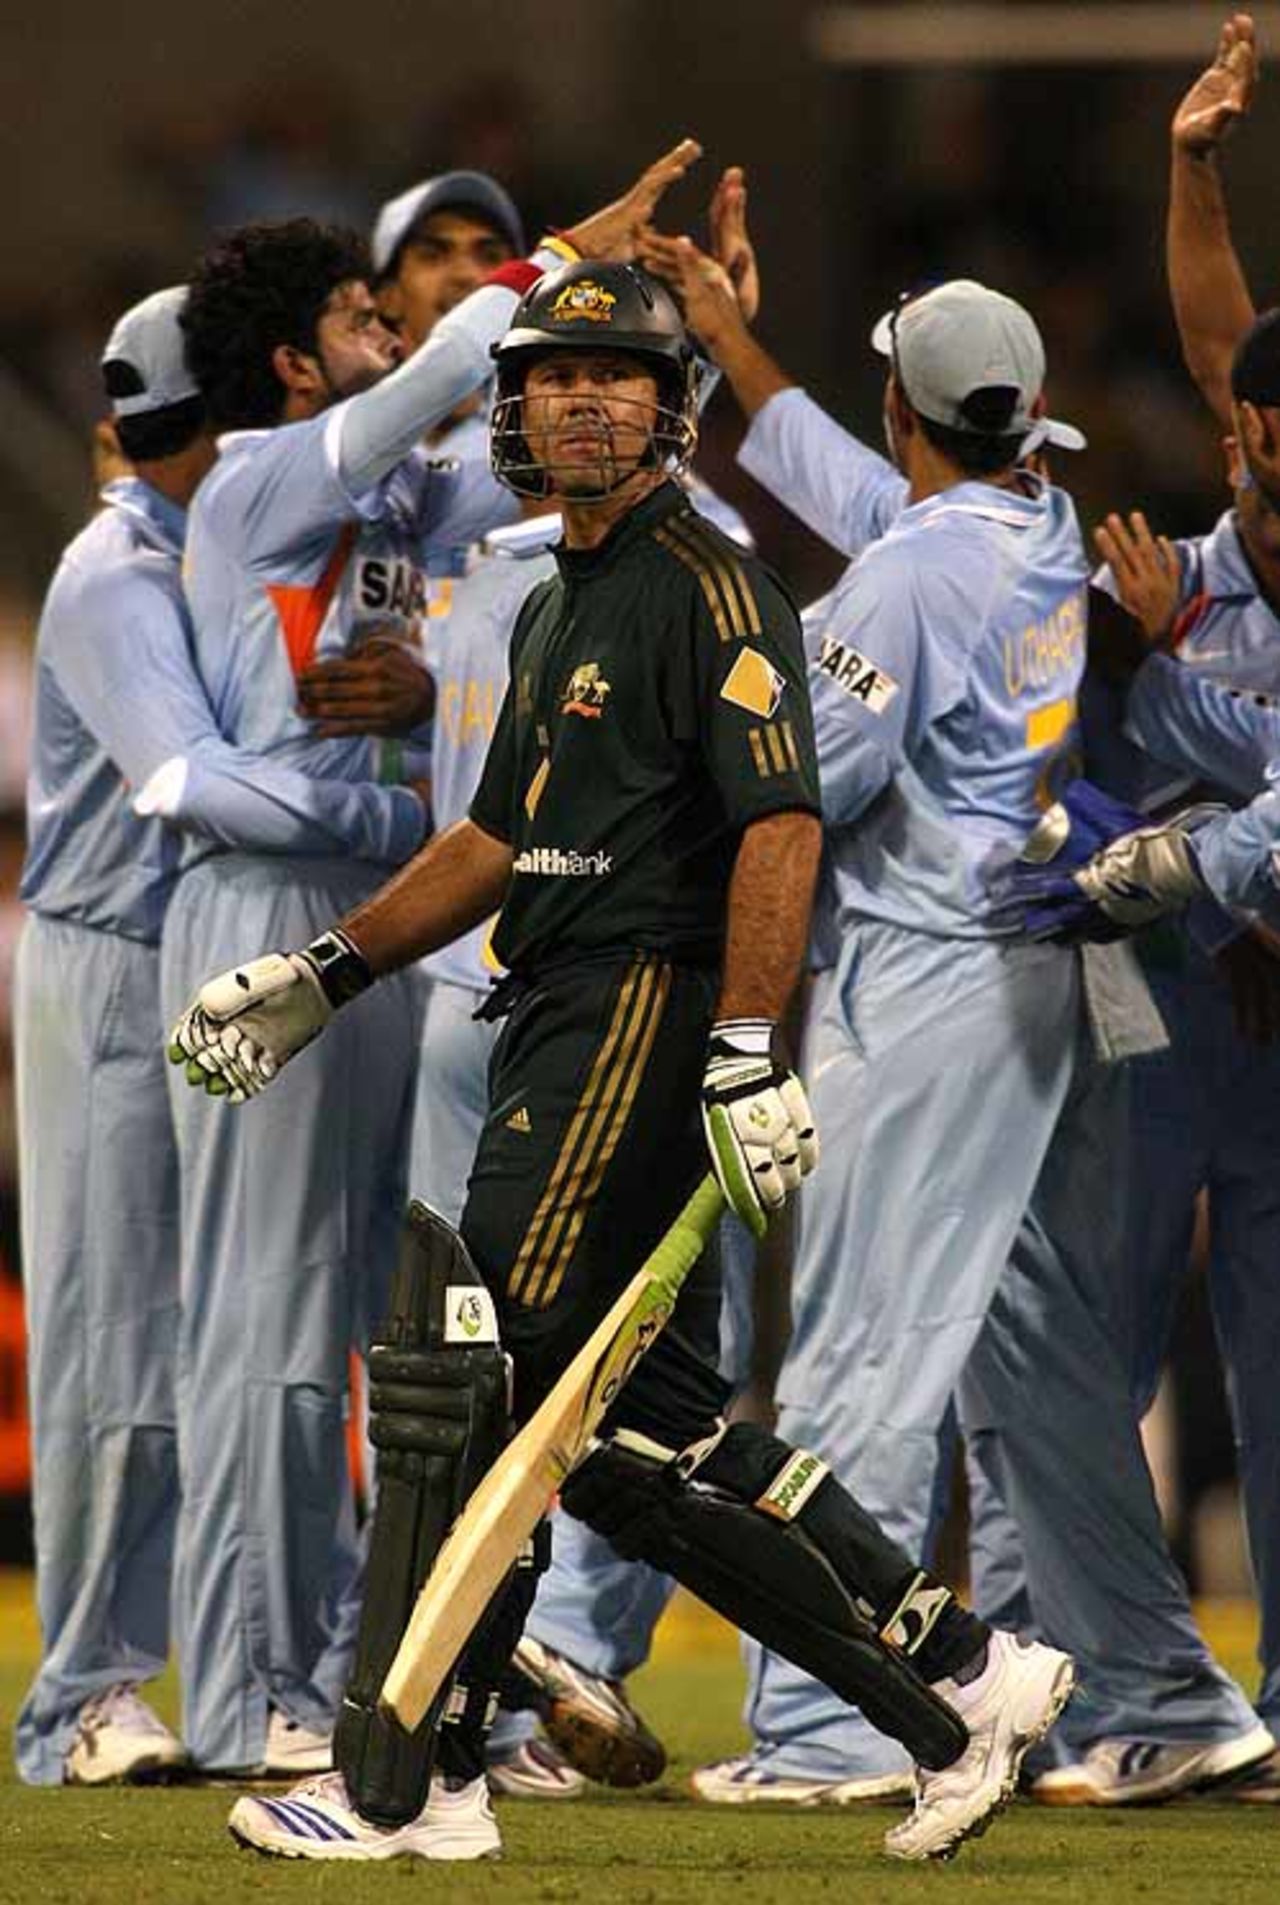 Ricky Ponting looks at the giant screen on his way to the dressing room, Australia v India, CB series, 1st ODI, Brisbane, February 3, 2008